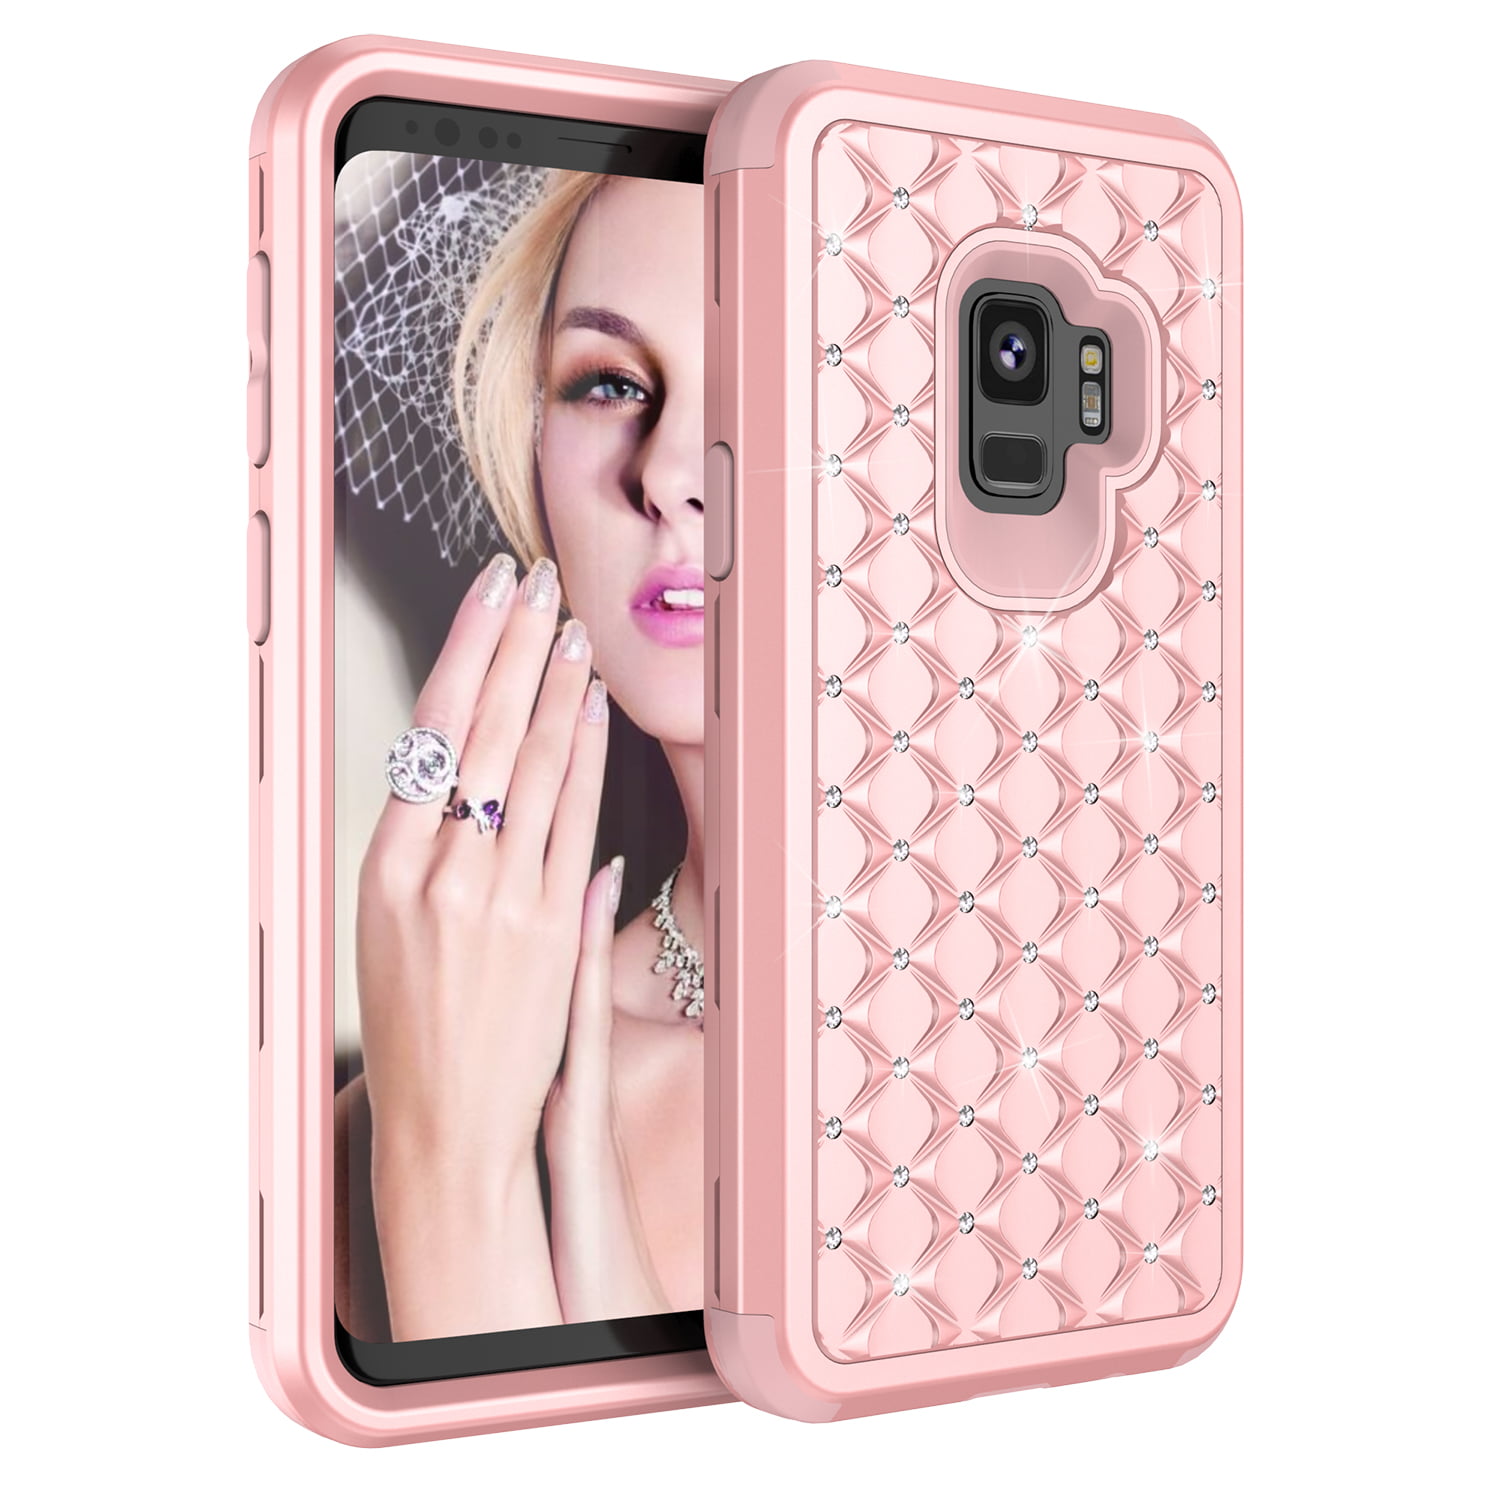 S9 Case, Galaxy S9 Plus Allytech 3 in 1 [Studded Rhinestone][Full-Body Protective] [Shockproof] PC+ Soft Silicon Rubber Armor Defender Protective Case Cover, Rosegold - Walmart.com